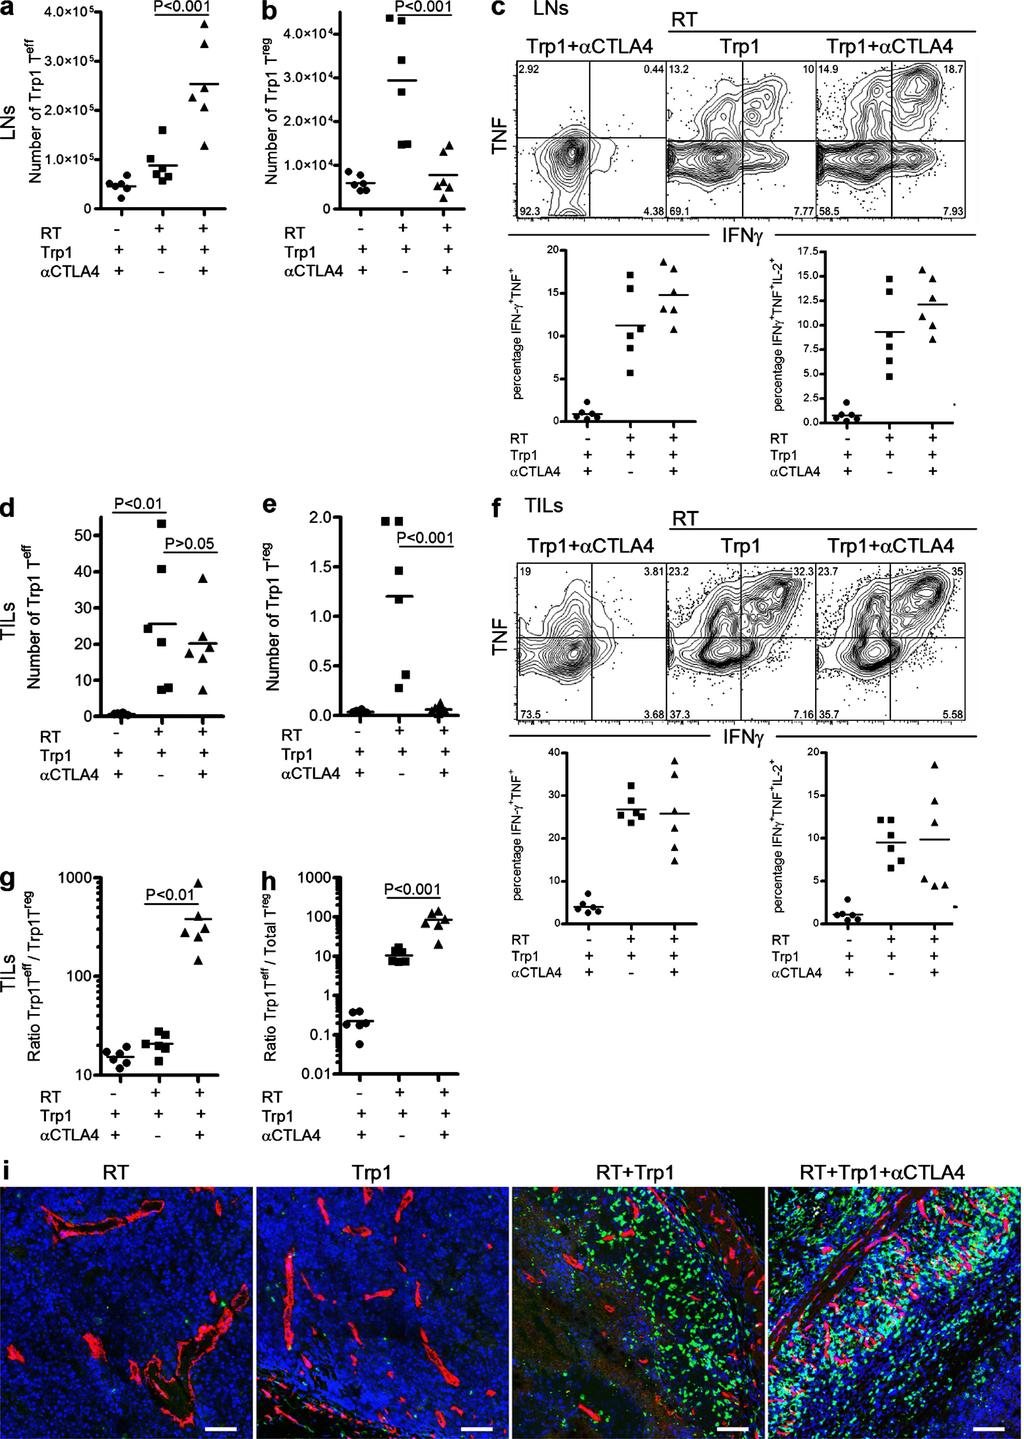 Published February 15, 2010 for RT in the activation and differentiation of tumor reactive CD4+Trp1+ Teff cells and for CTLA-4 blockade in driving further expansion of such cells while preventing T